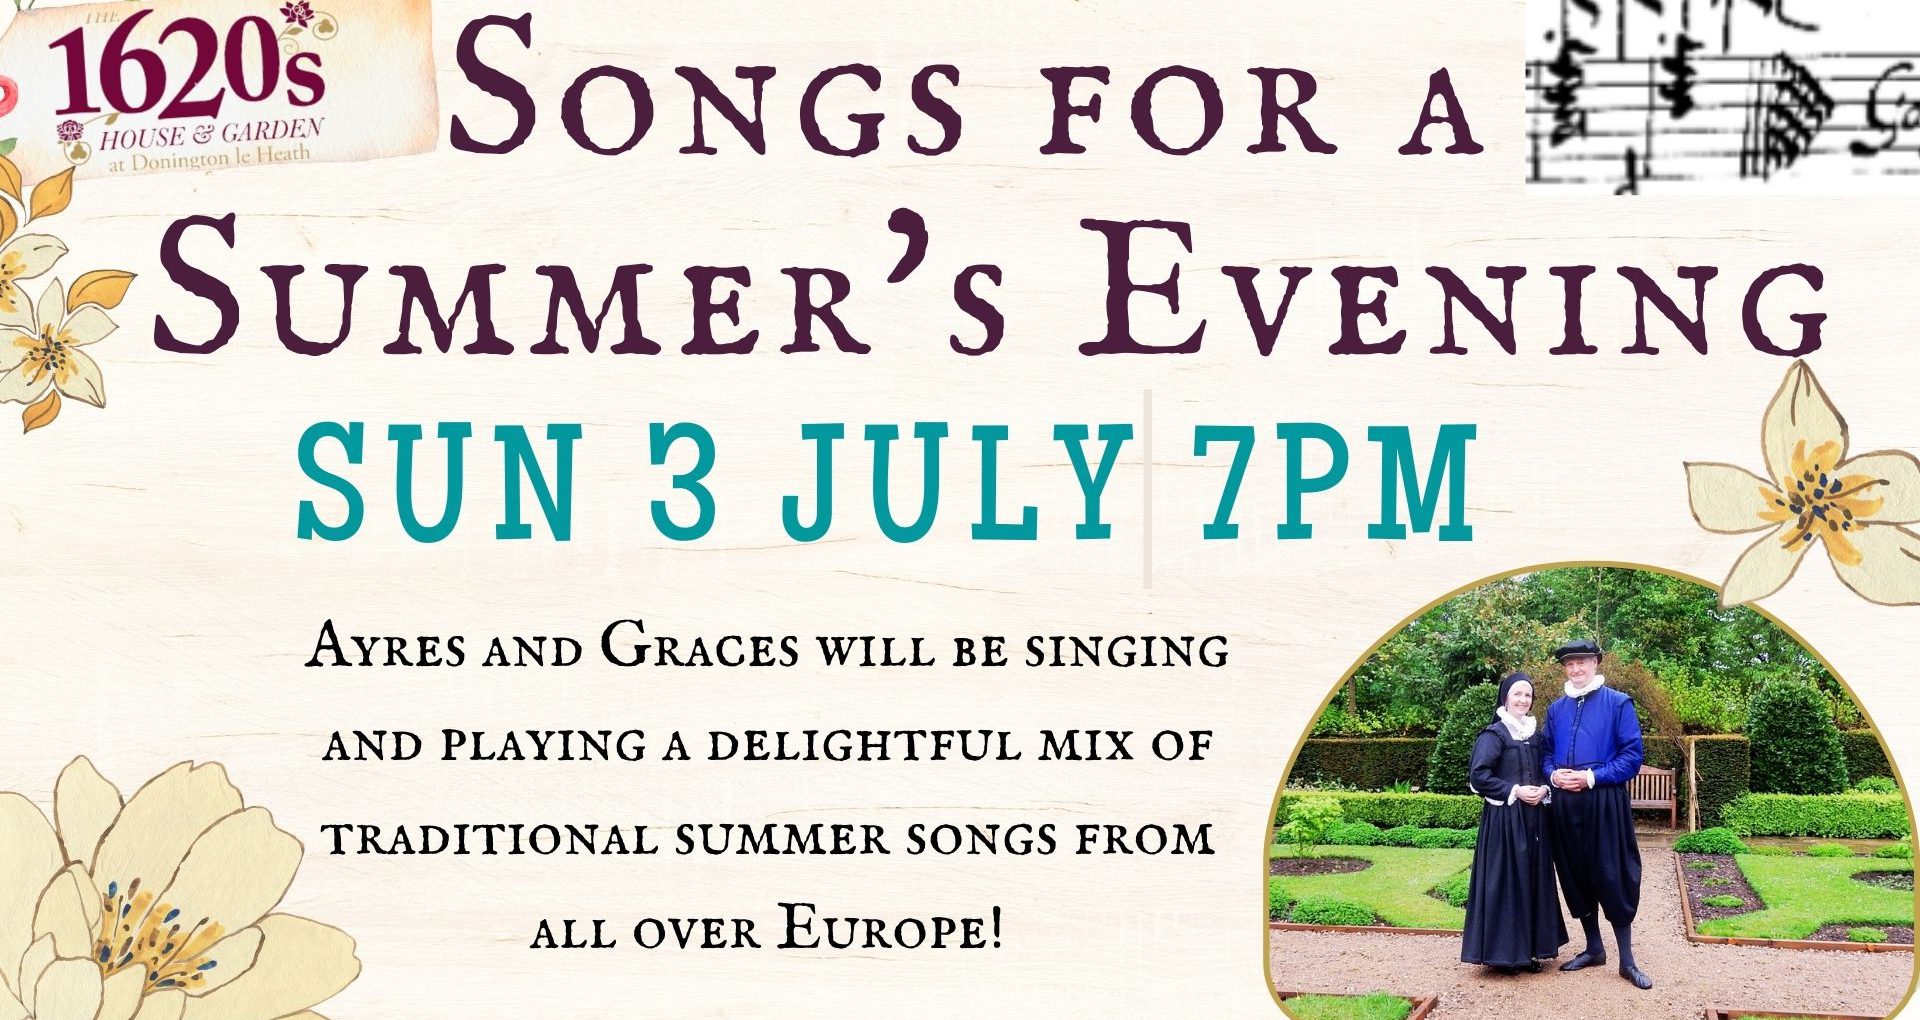 Ayres and Graces, 'Songs for a Summer Evening'